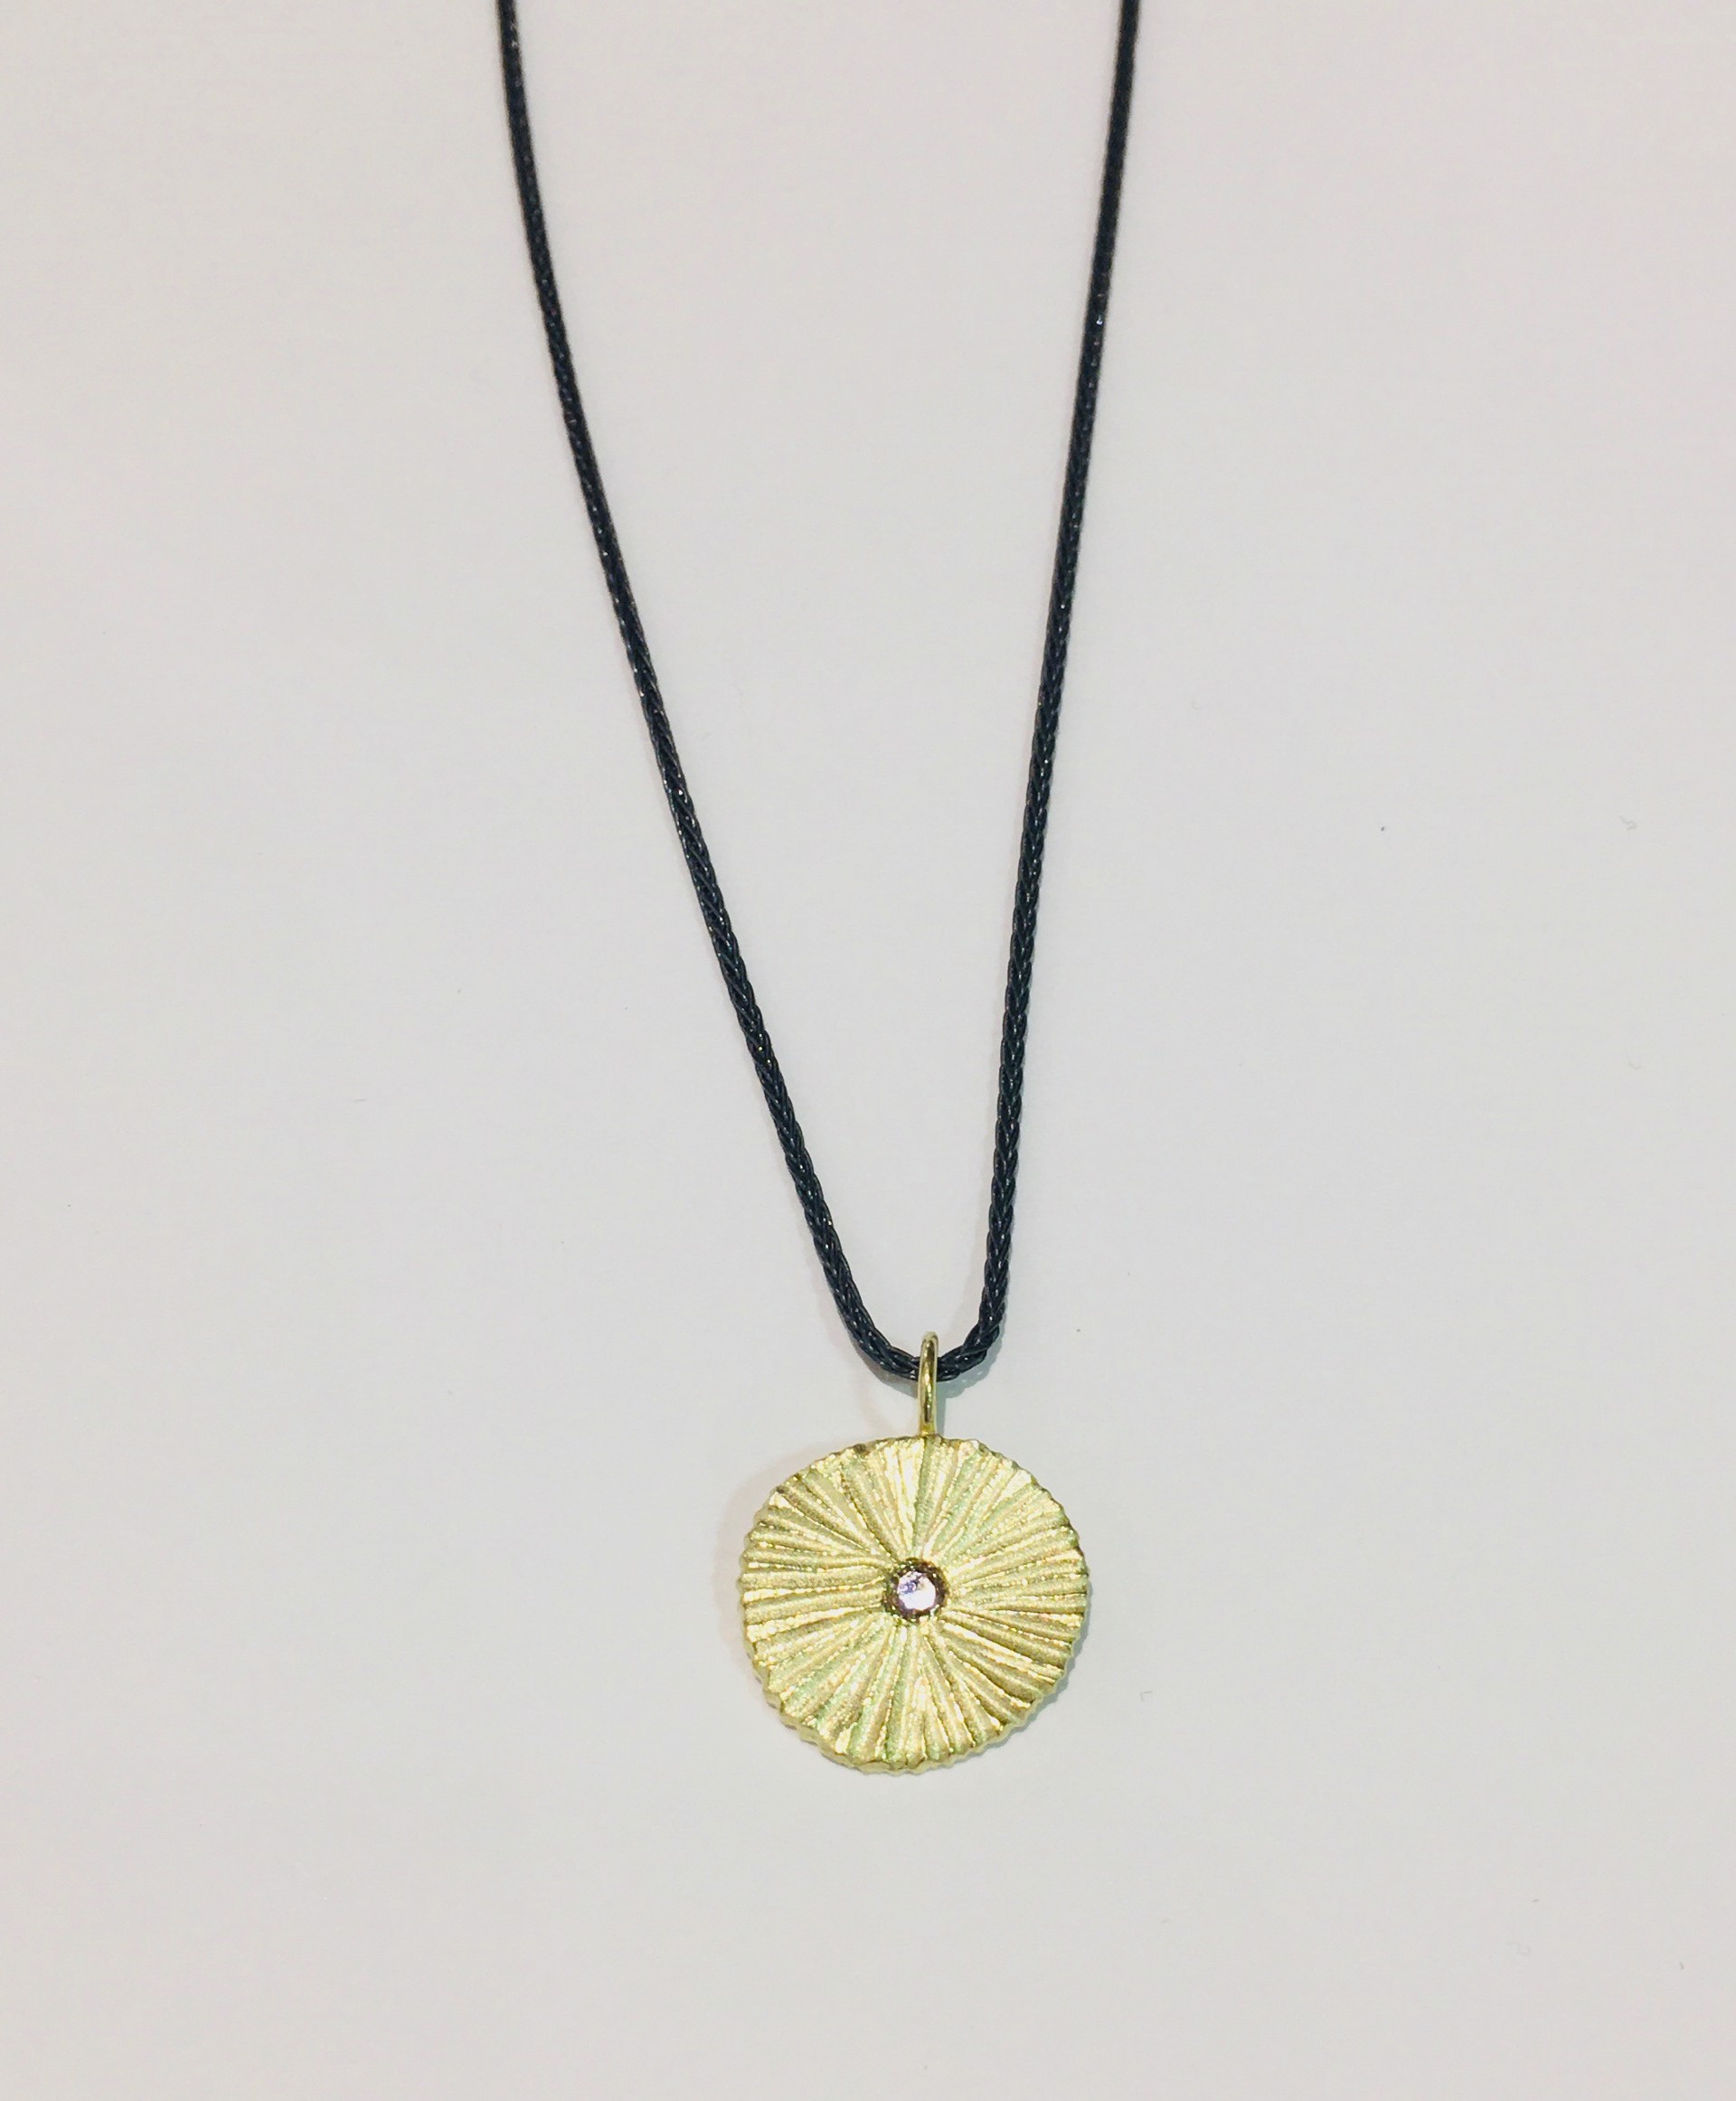 Gold and Diamond Pendant by DAHLIA KANNER